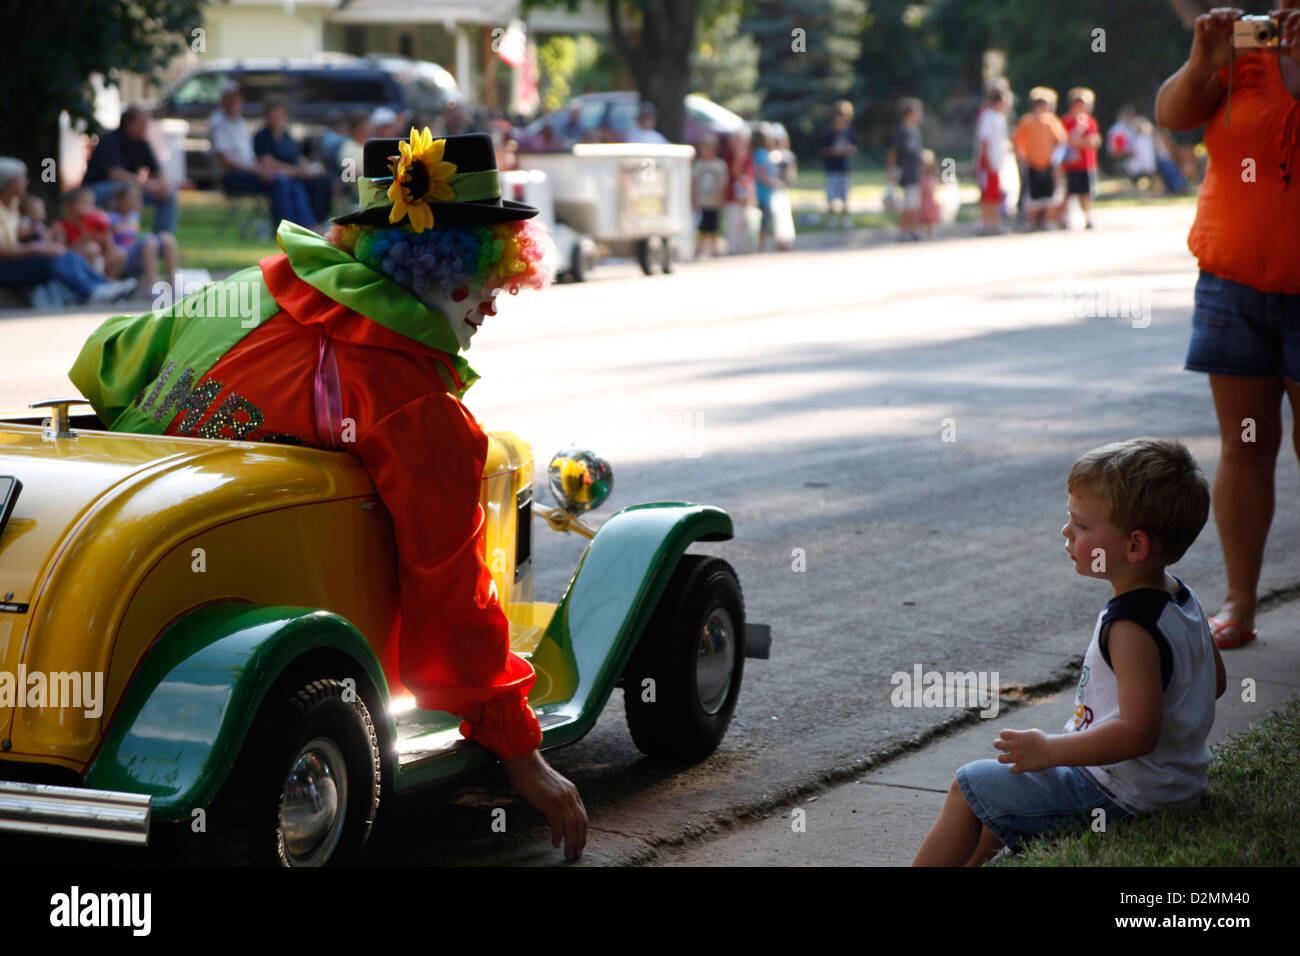 Colorful clown in a car talking to a little boy during a parade Stock Photo